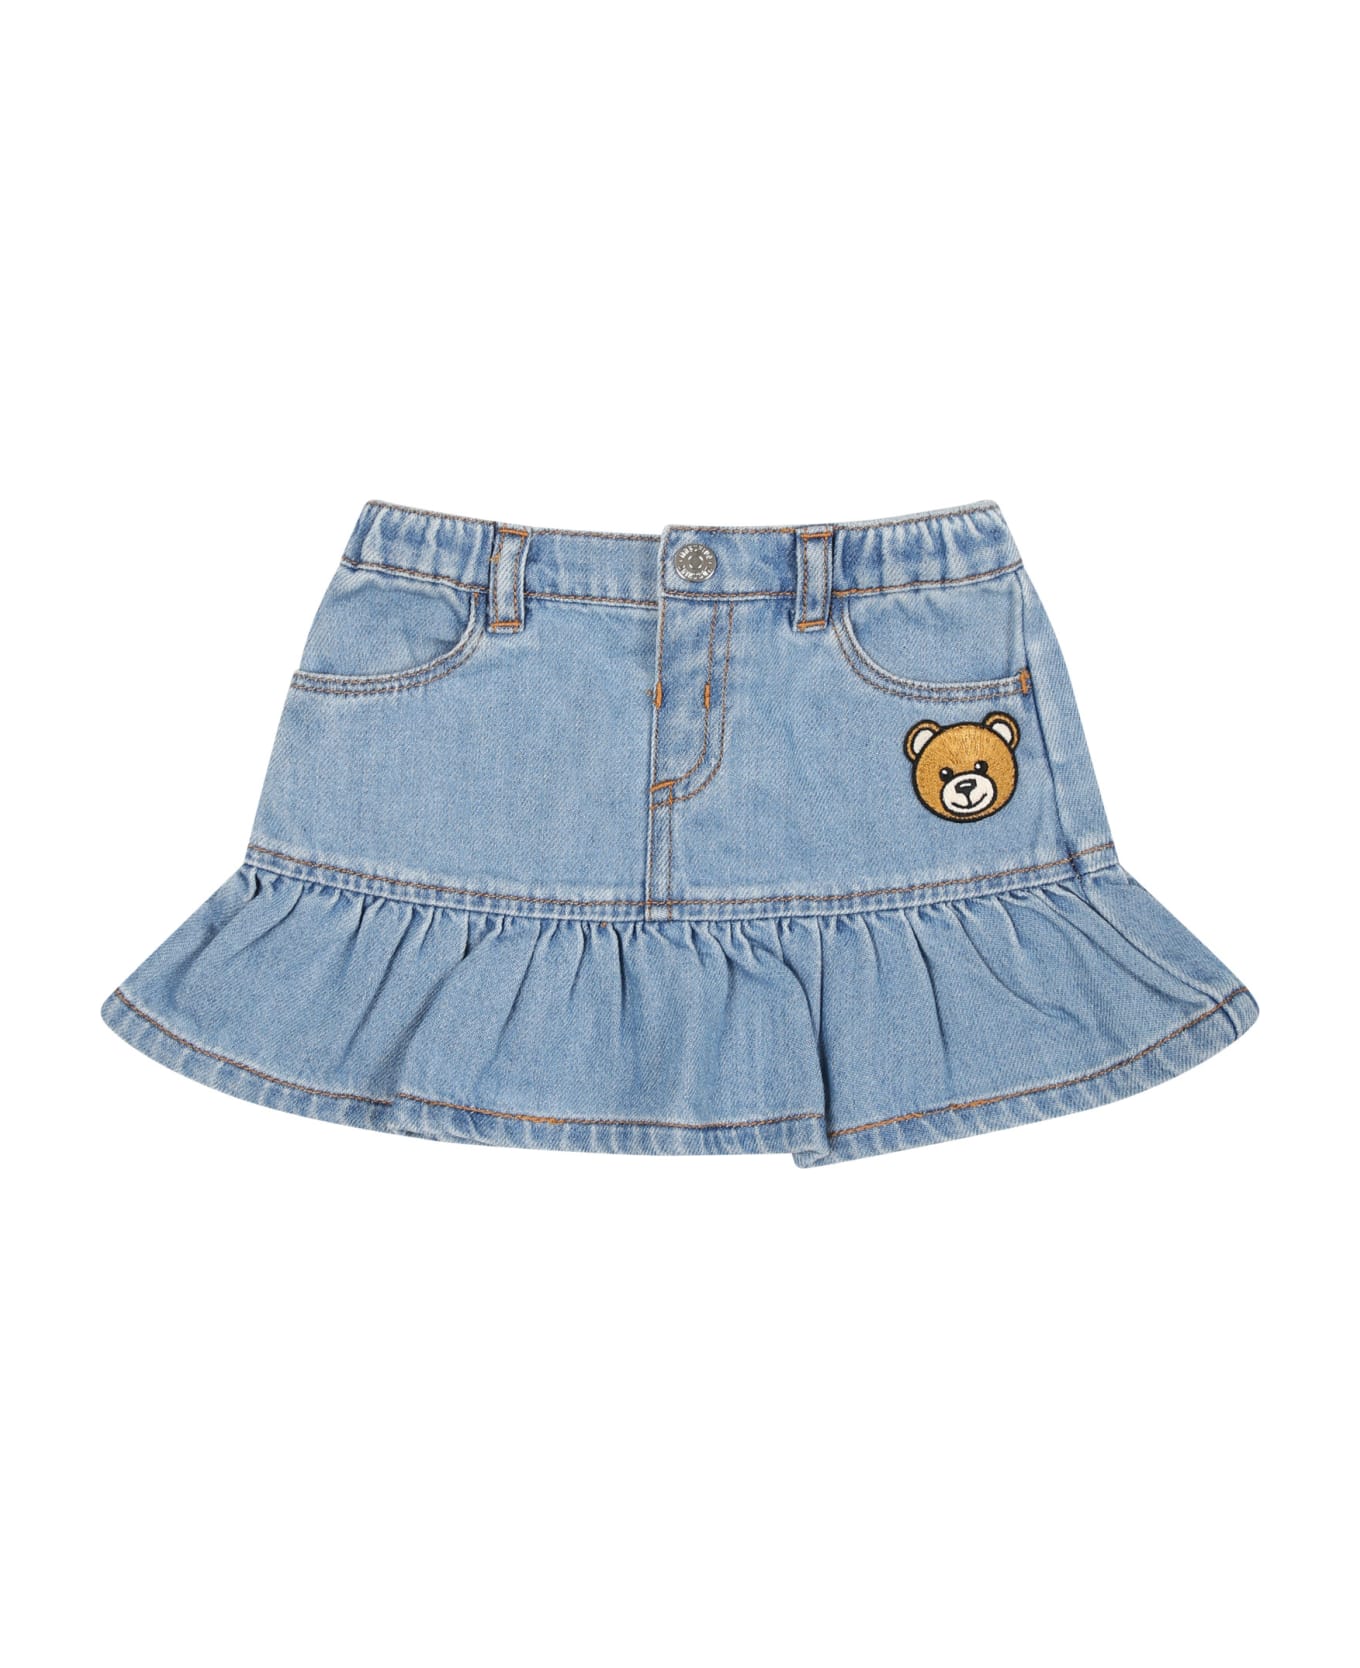 Moschino Casual Denim Skirt For Baby Girl With Teddy Bear - BLUE